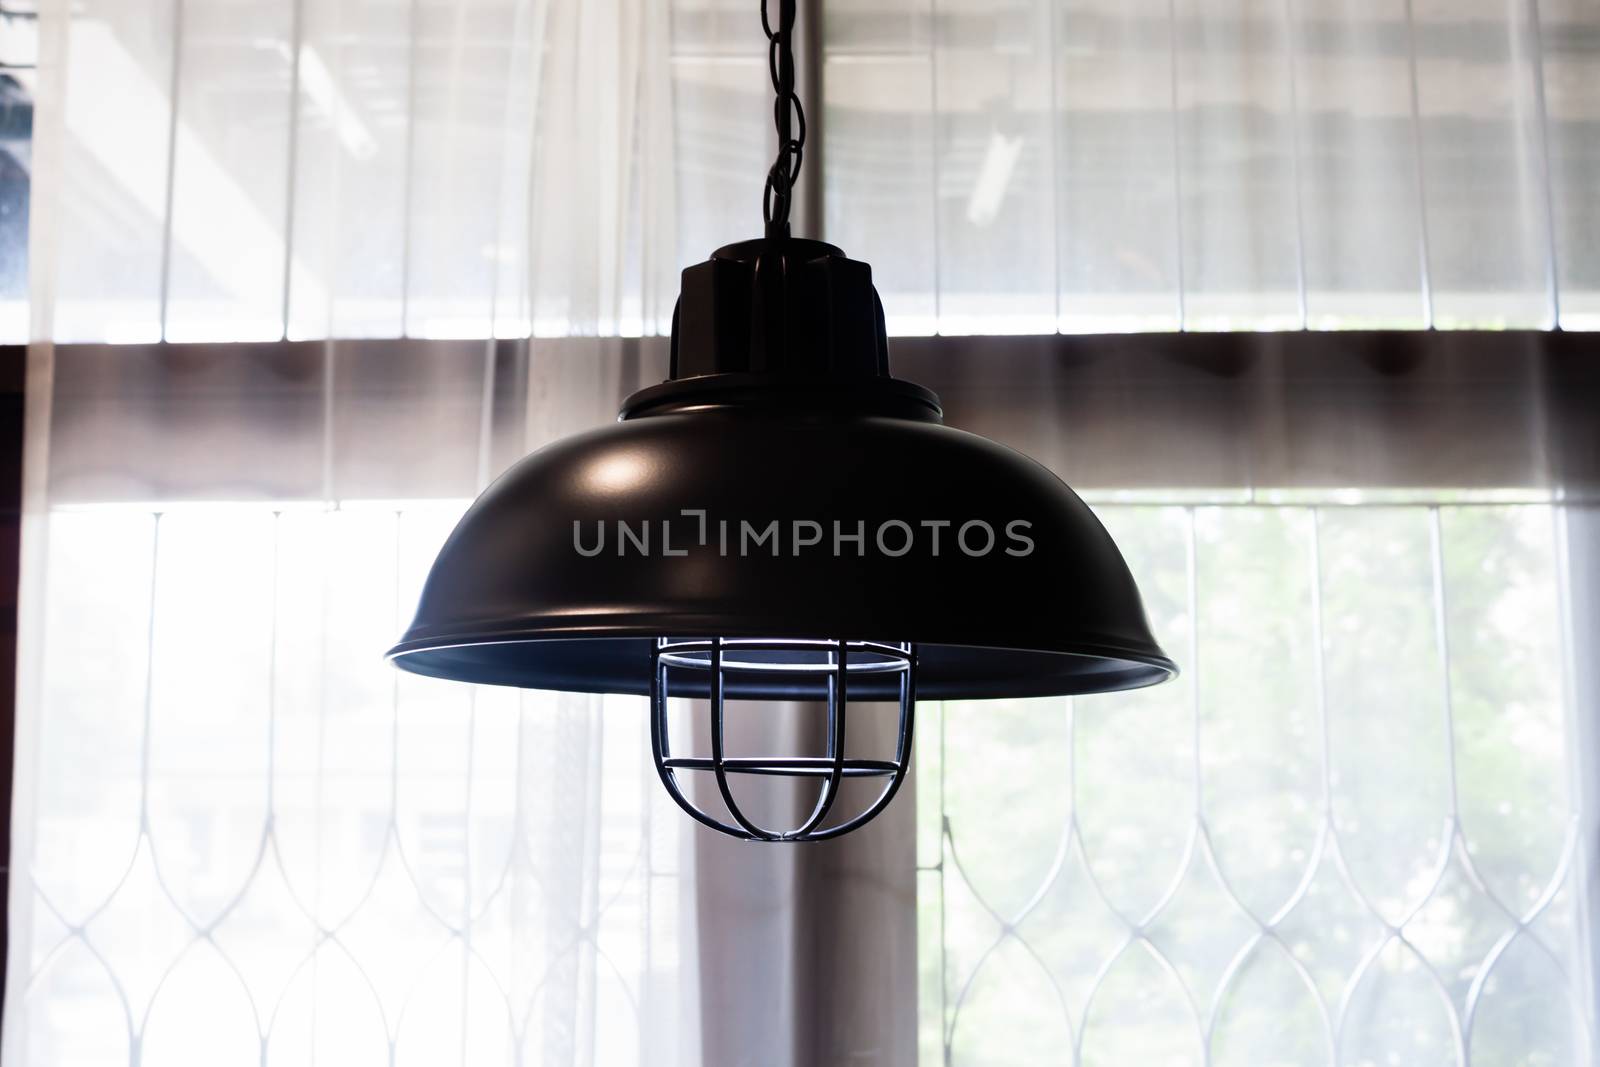 Lamps in a modern cafe, stock photo